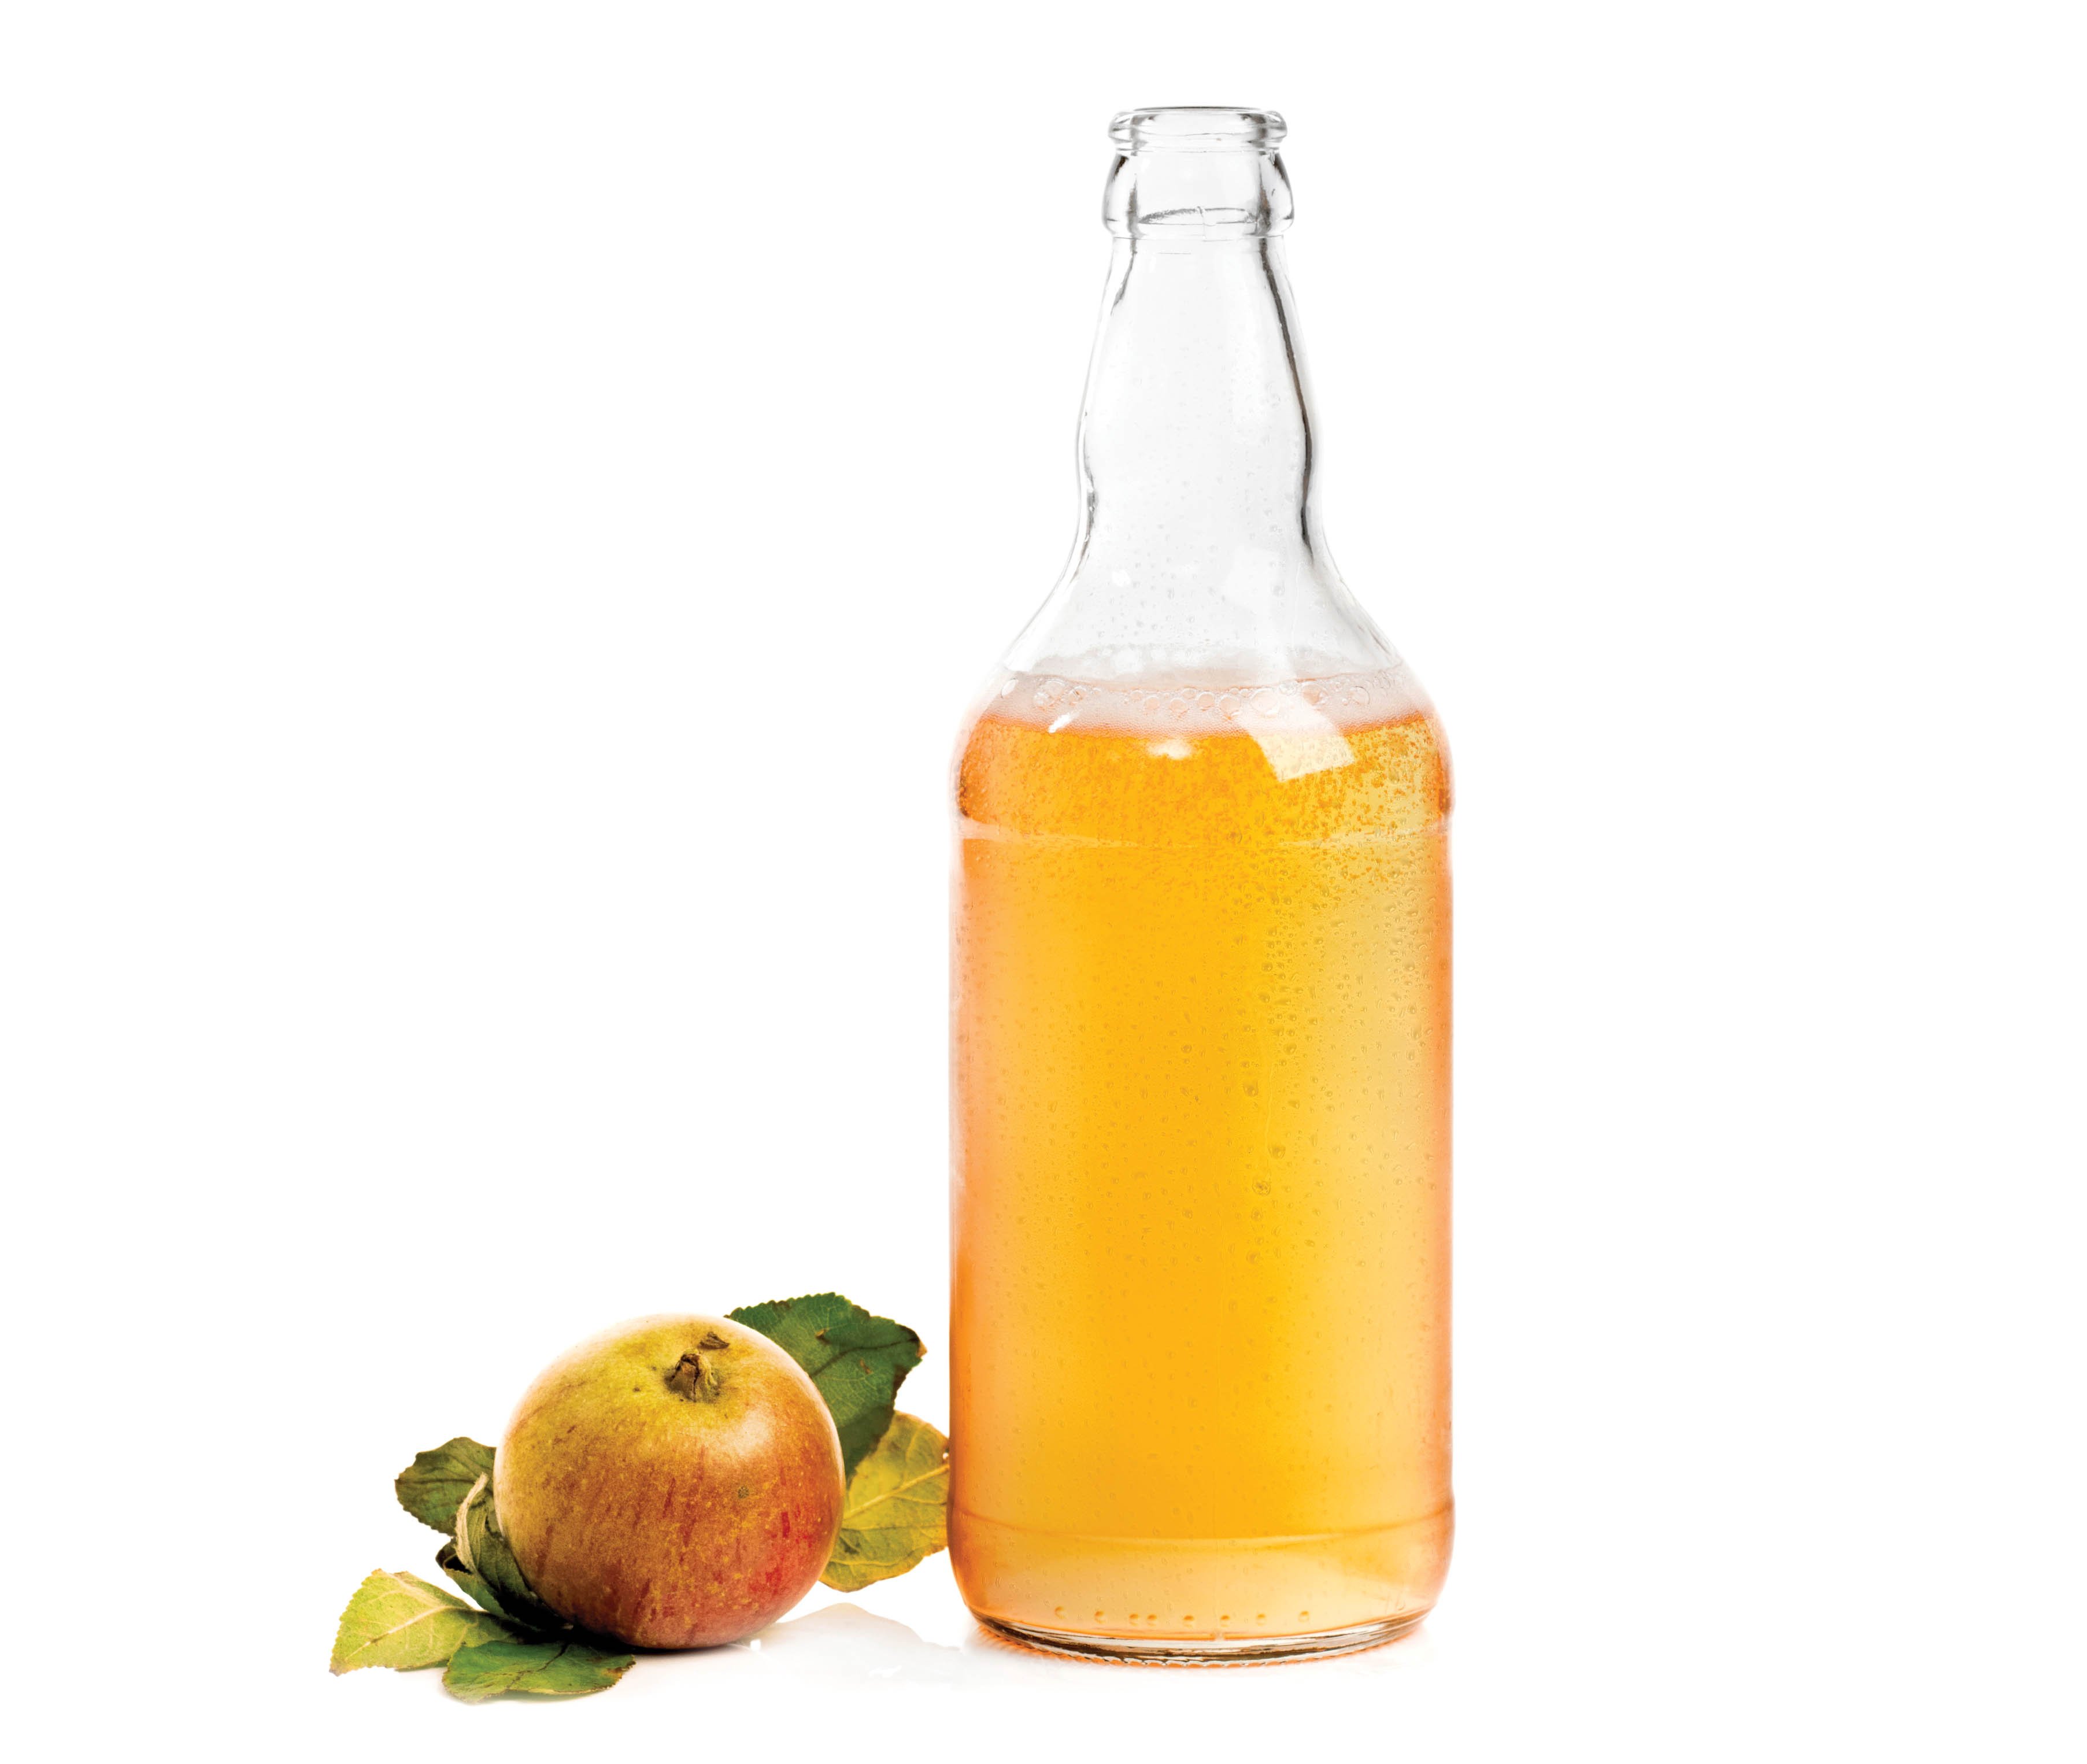 Apple and apple cider in glass bottle, Feb 13, p24